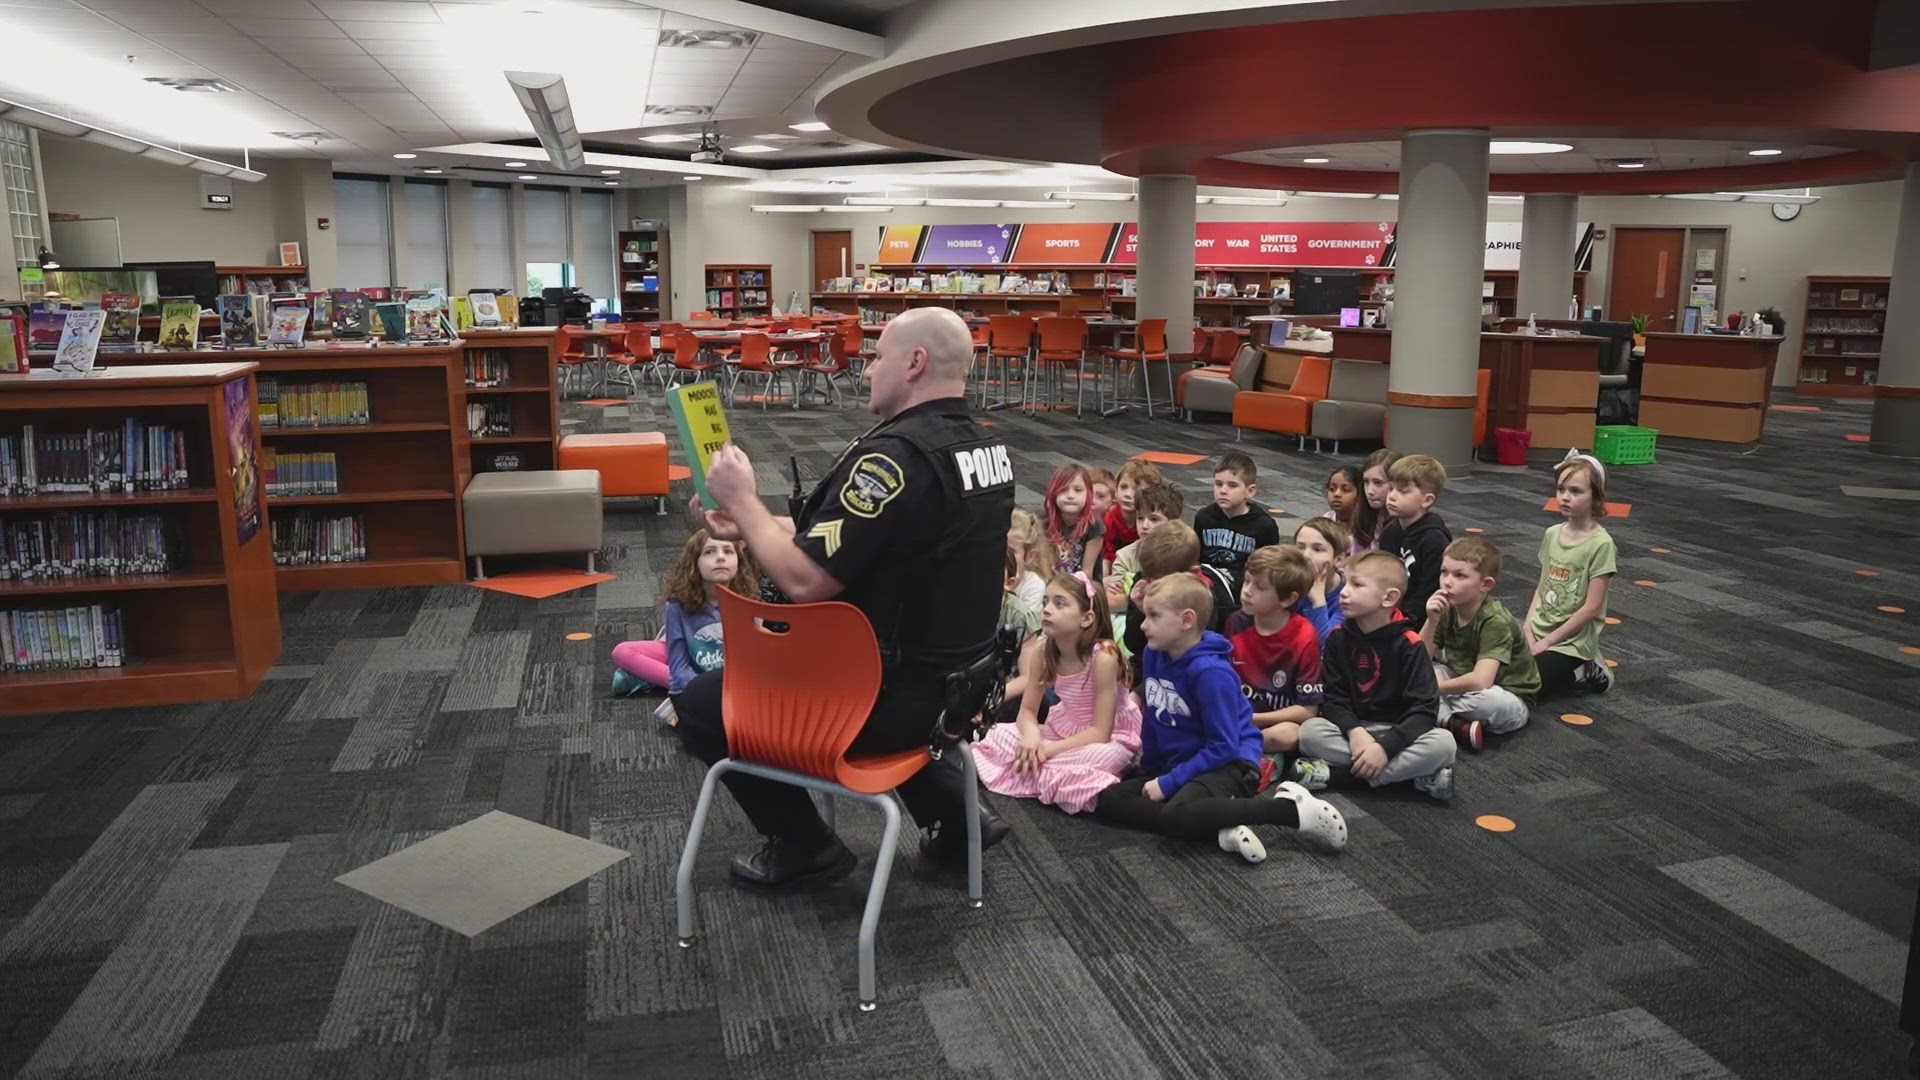 Officer Mike Hargrove is sharing his passion for inspiring children with a new book featuring his pet bearded dragon.